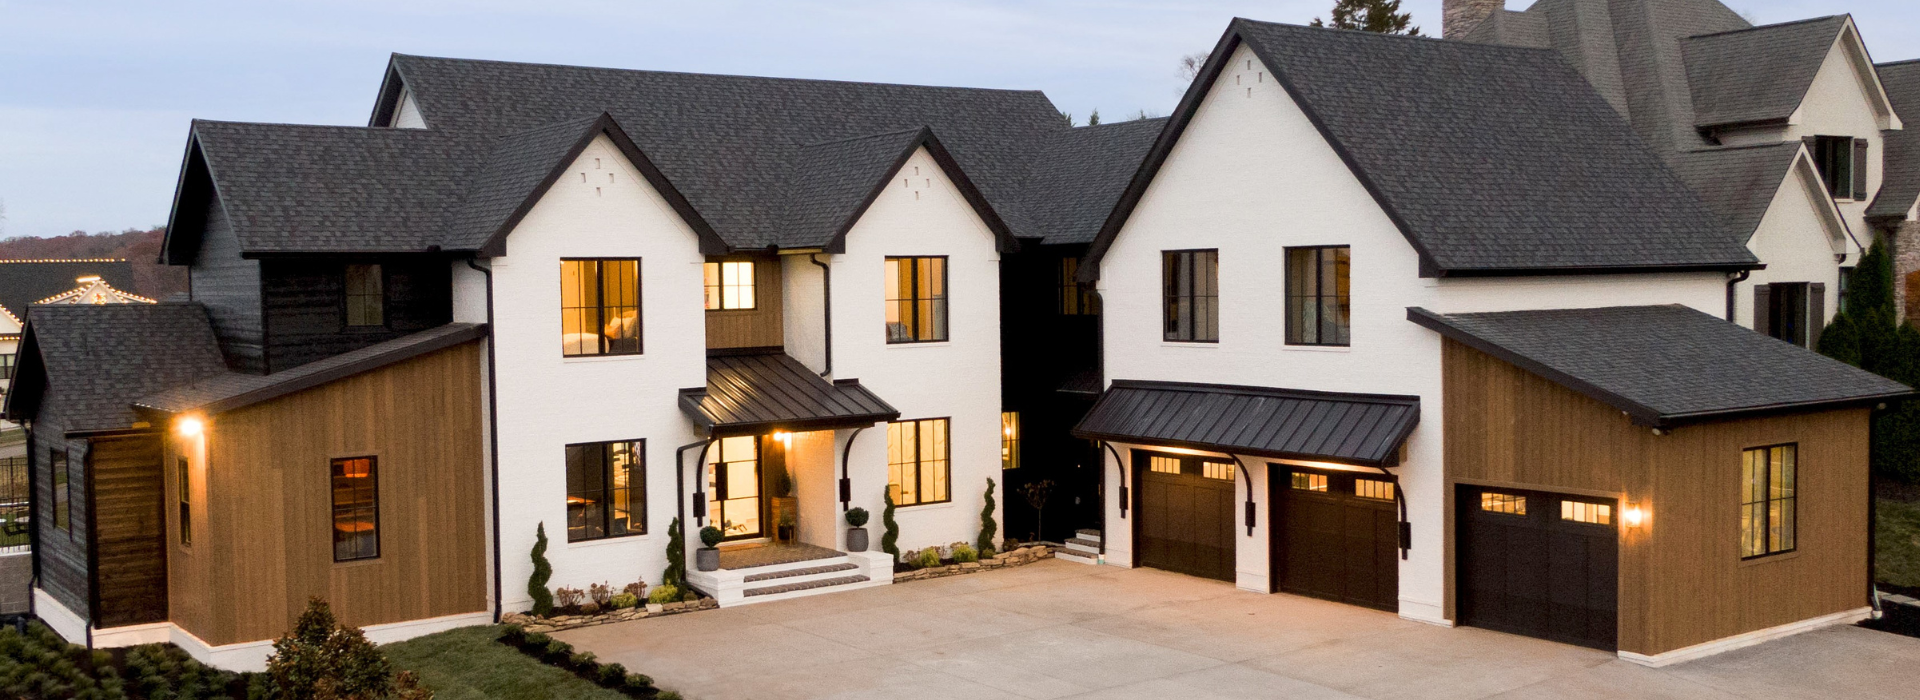 Modern suburban mixed materials front exterior at dusk with brick and thermally modified wood siding Lost Trail Black Forest